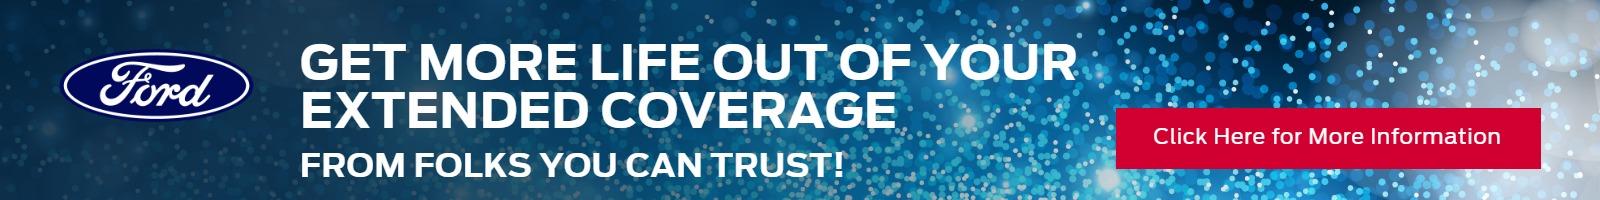 GET MORE LIFE OUT OF YOUR EXTENDED COVERAGE
FROM FOLKS YOU CAN TRUST!